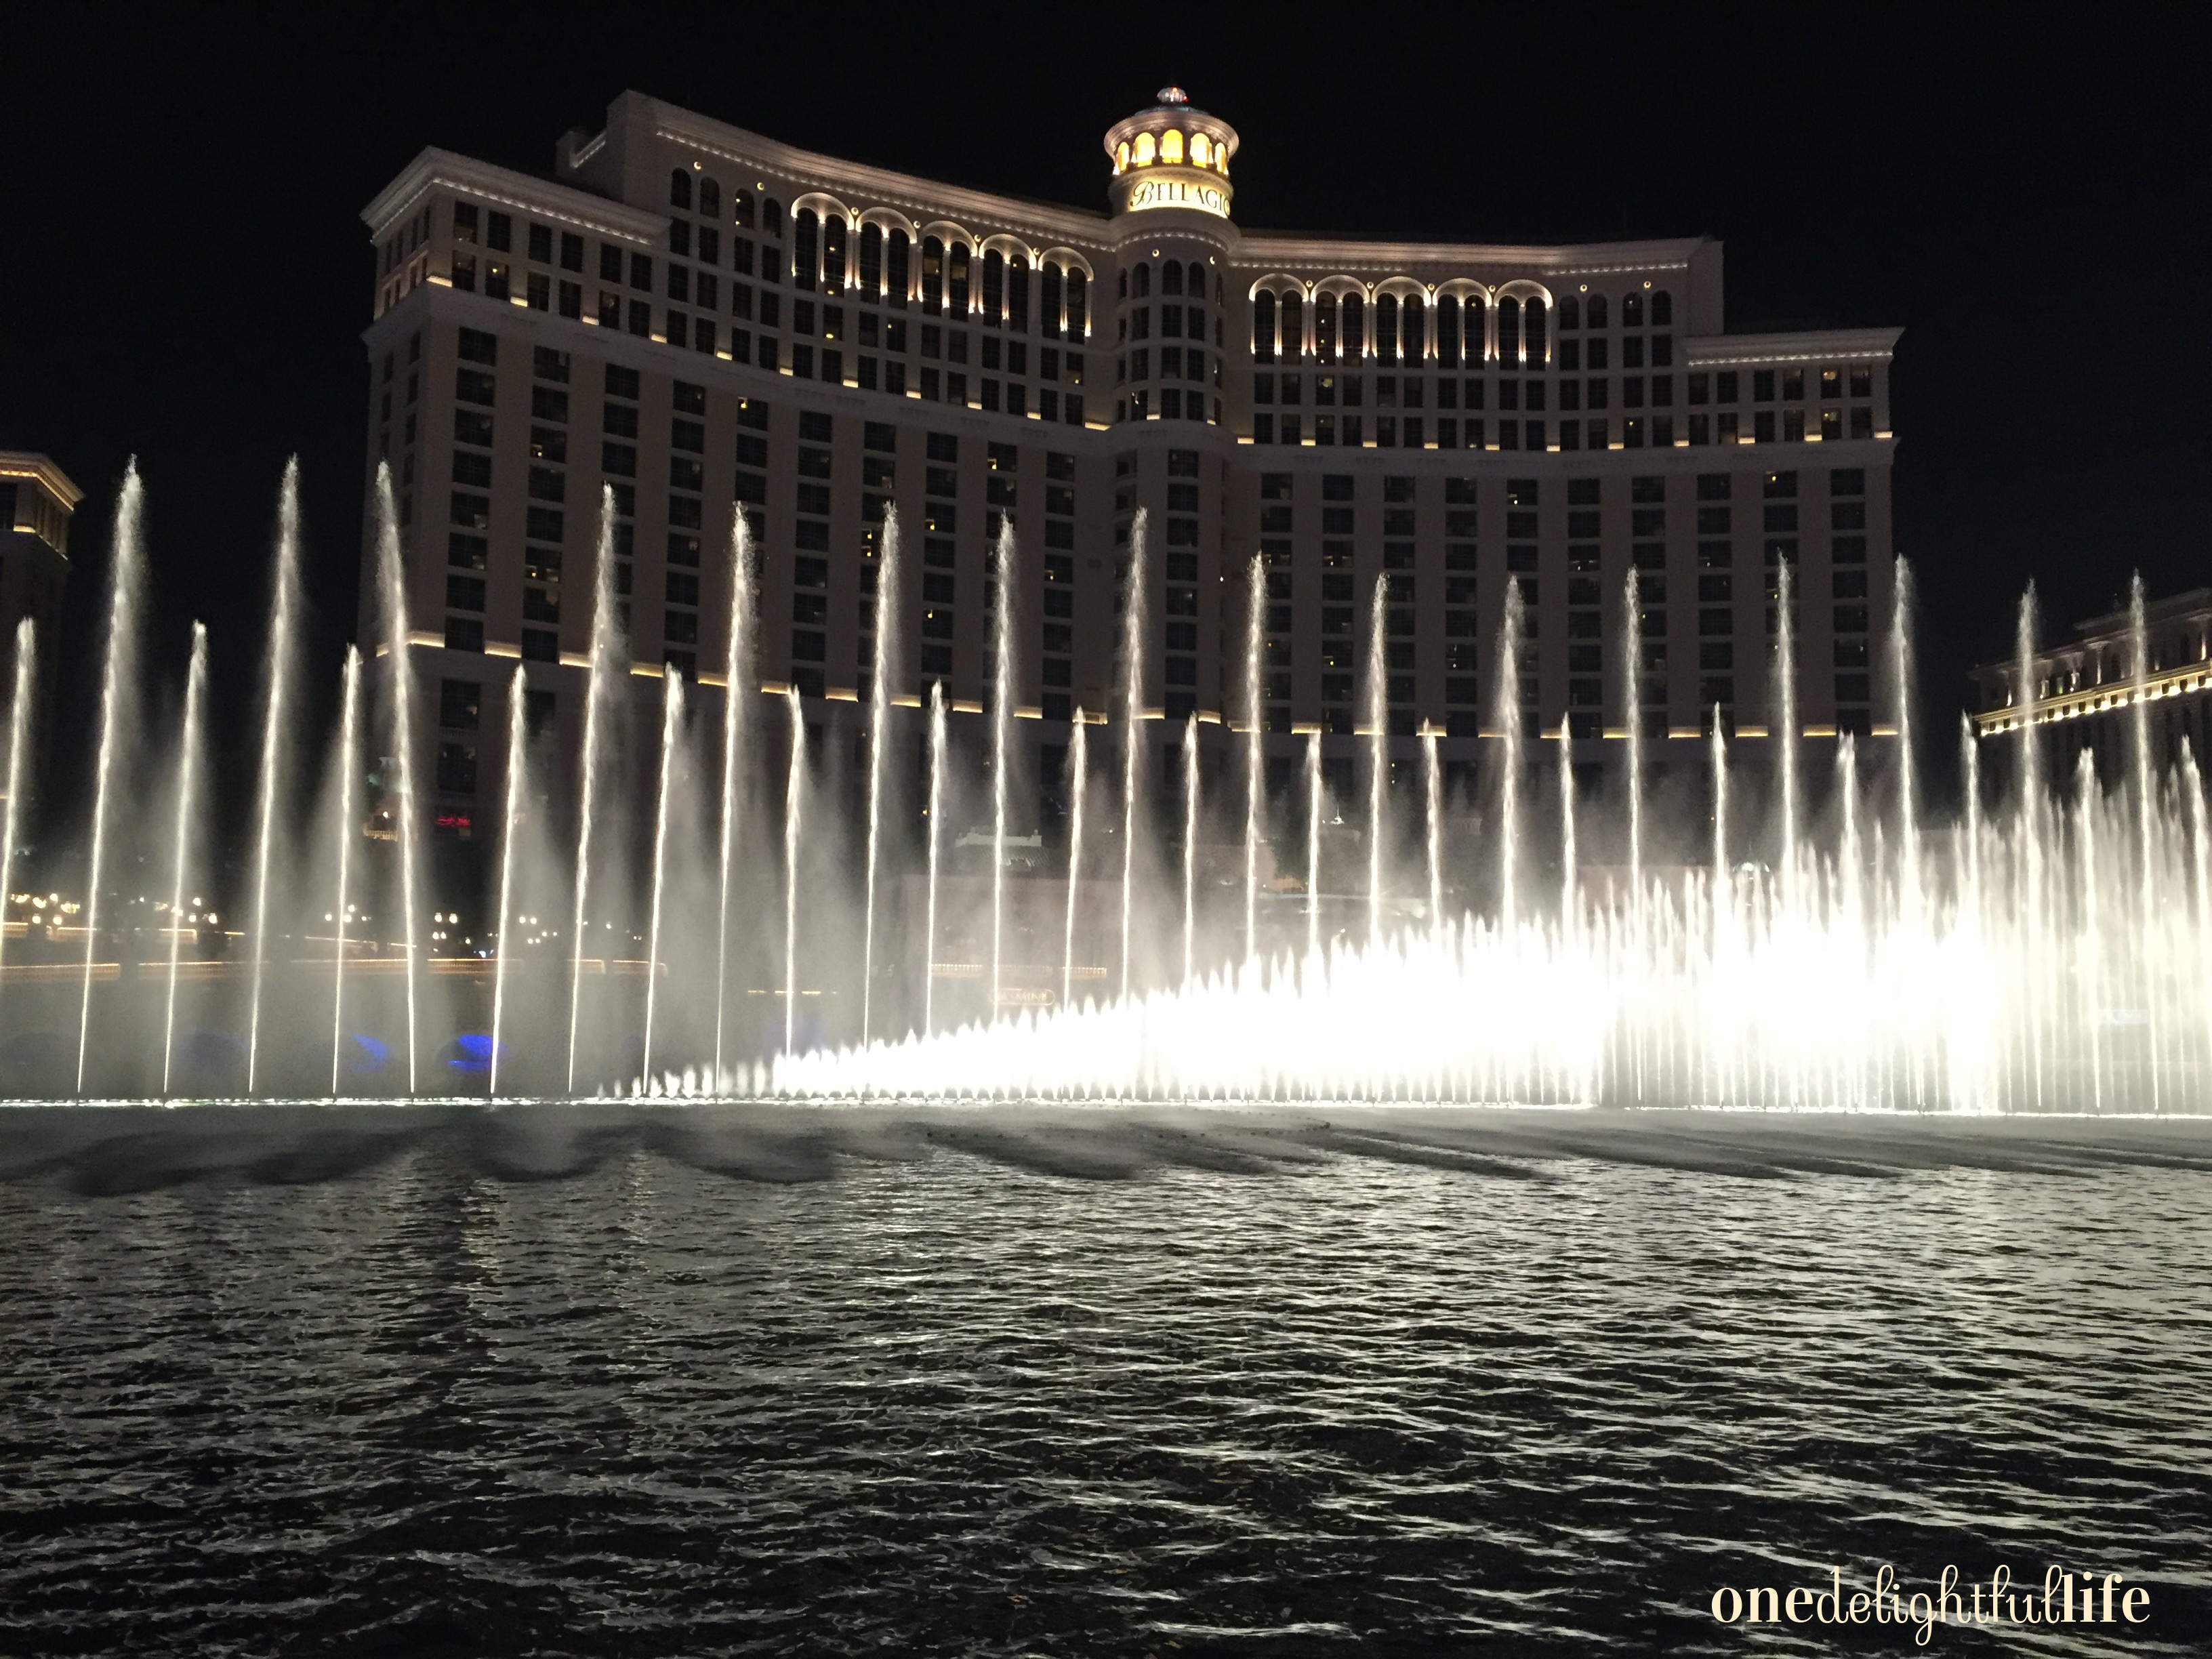 View the Fountains of Bellagio schedule here.